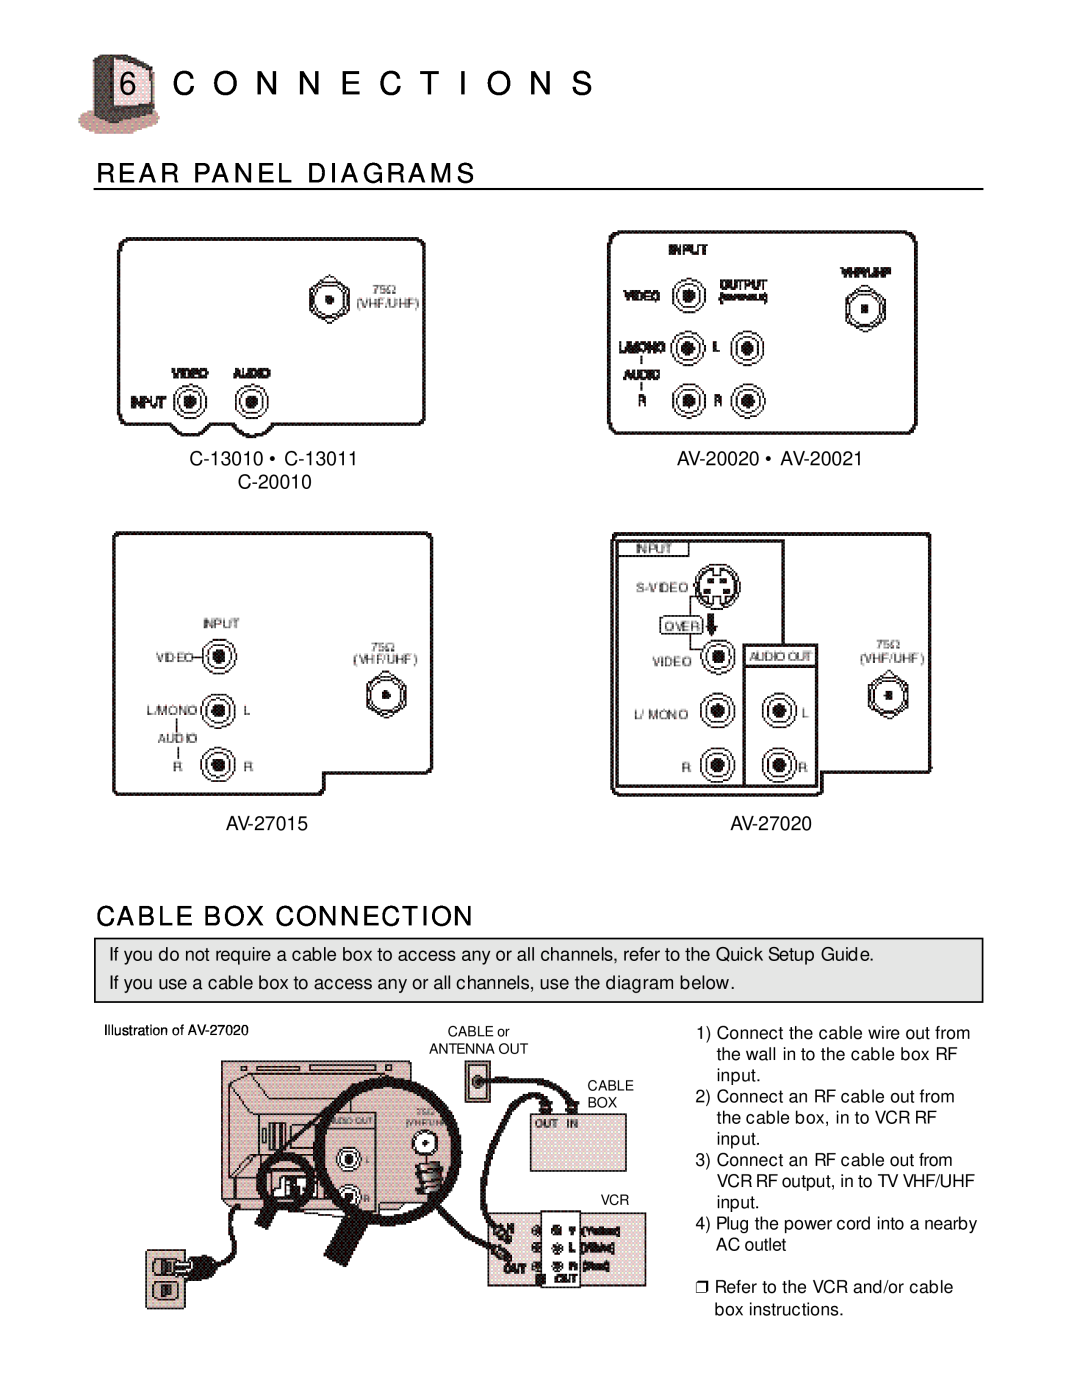 JVC AV 27020, C 13011, C-20010, C-13010, AV-27015, AV-20020 C O N N E C T I O N S, Rear Panel Diagrams, Cable Box Connection 